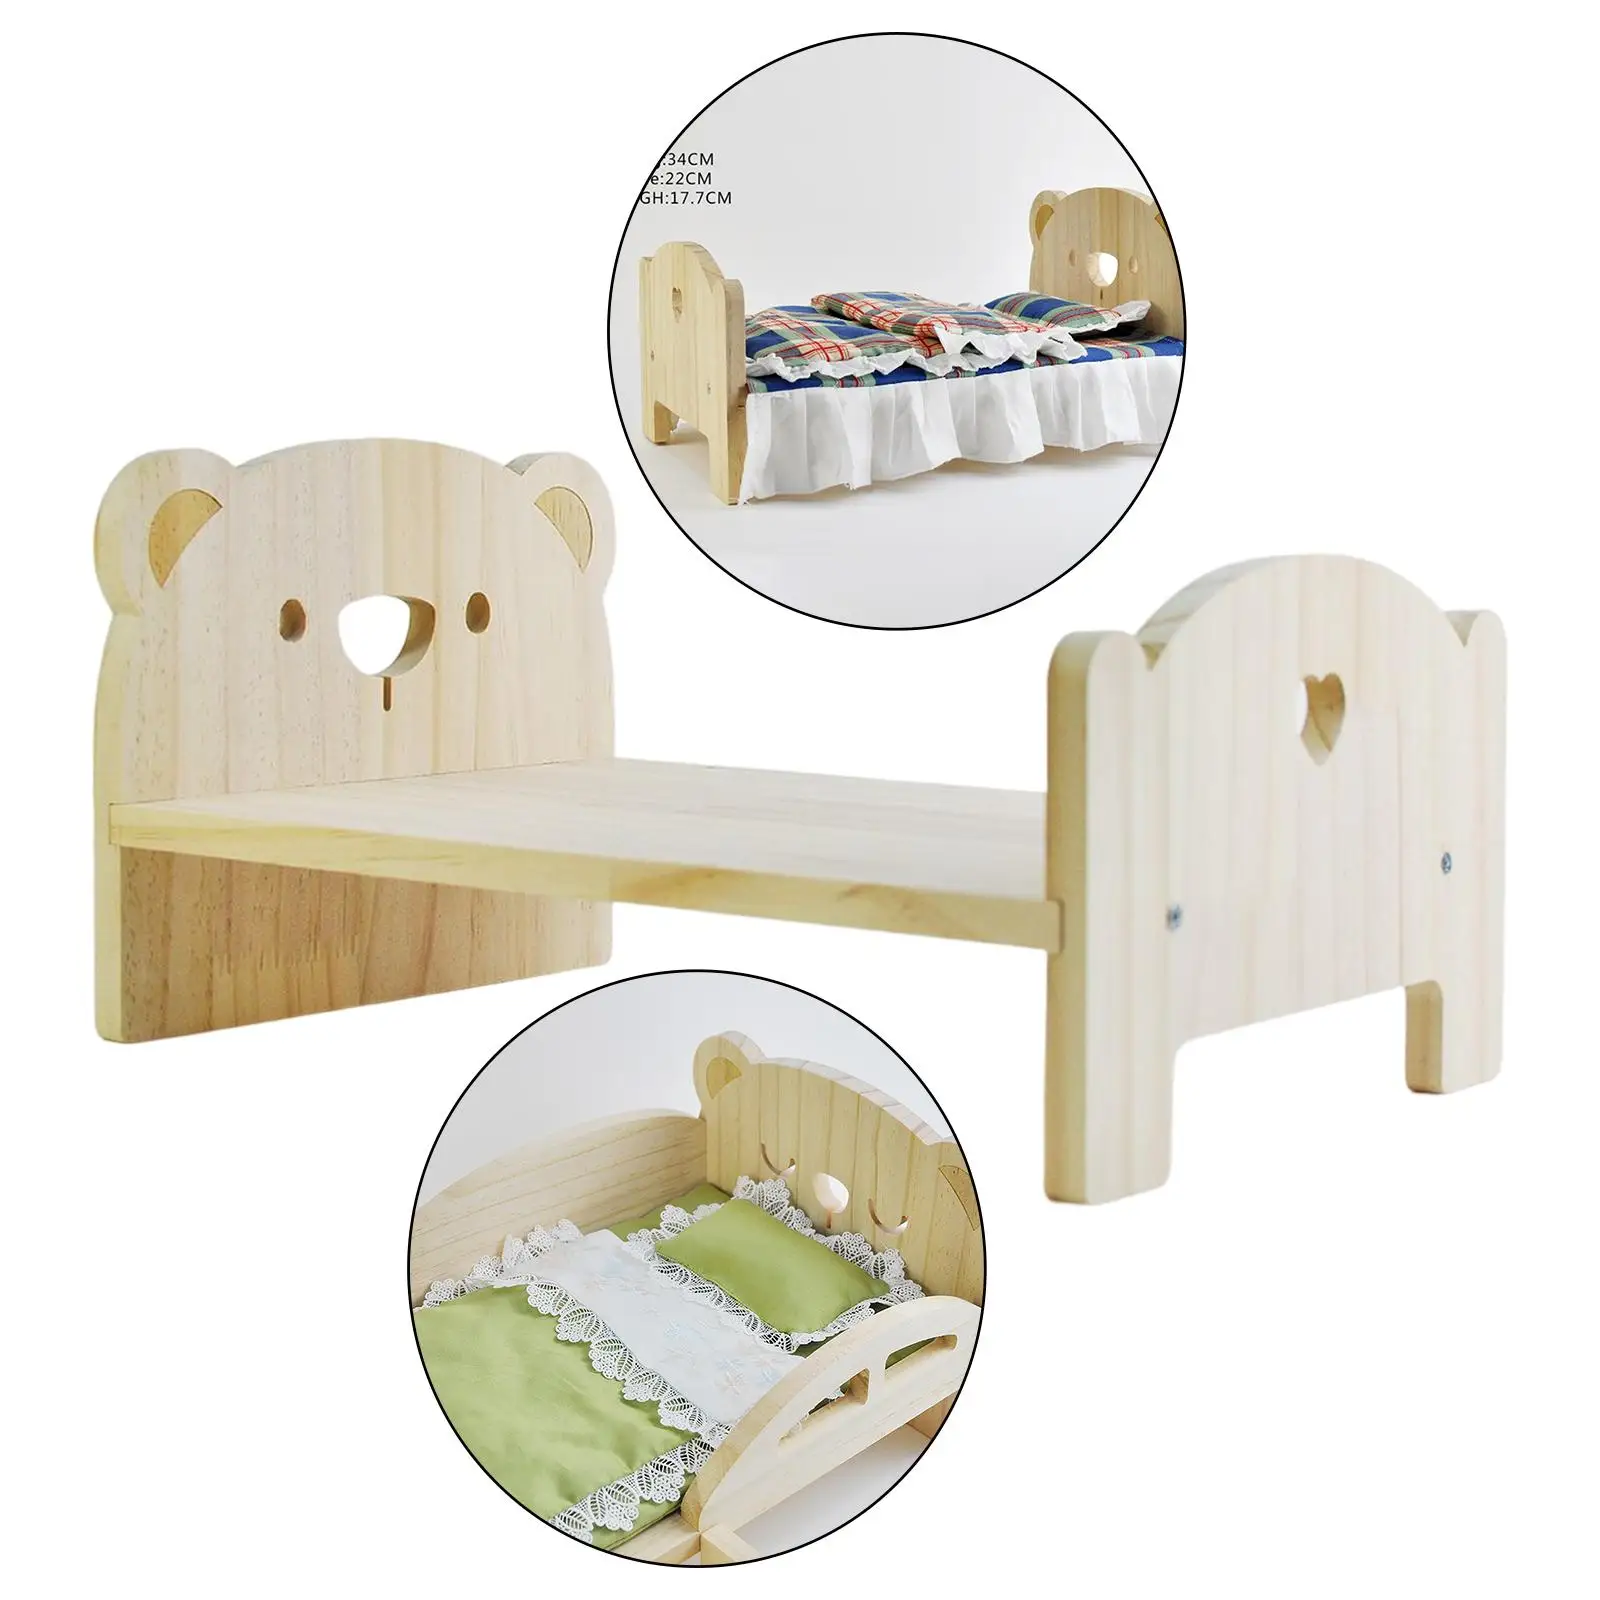 Mini Dollhouse Furnishings 1/6 Scale Wood Bed for Dolls Pretend Toys Bedroom Dollhouses DIY Accessory